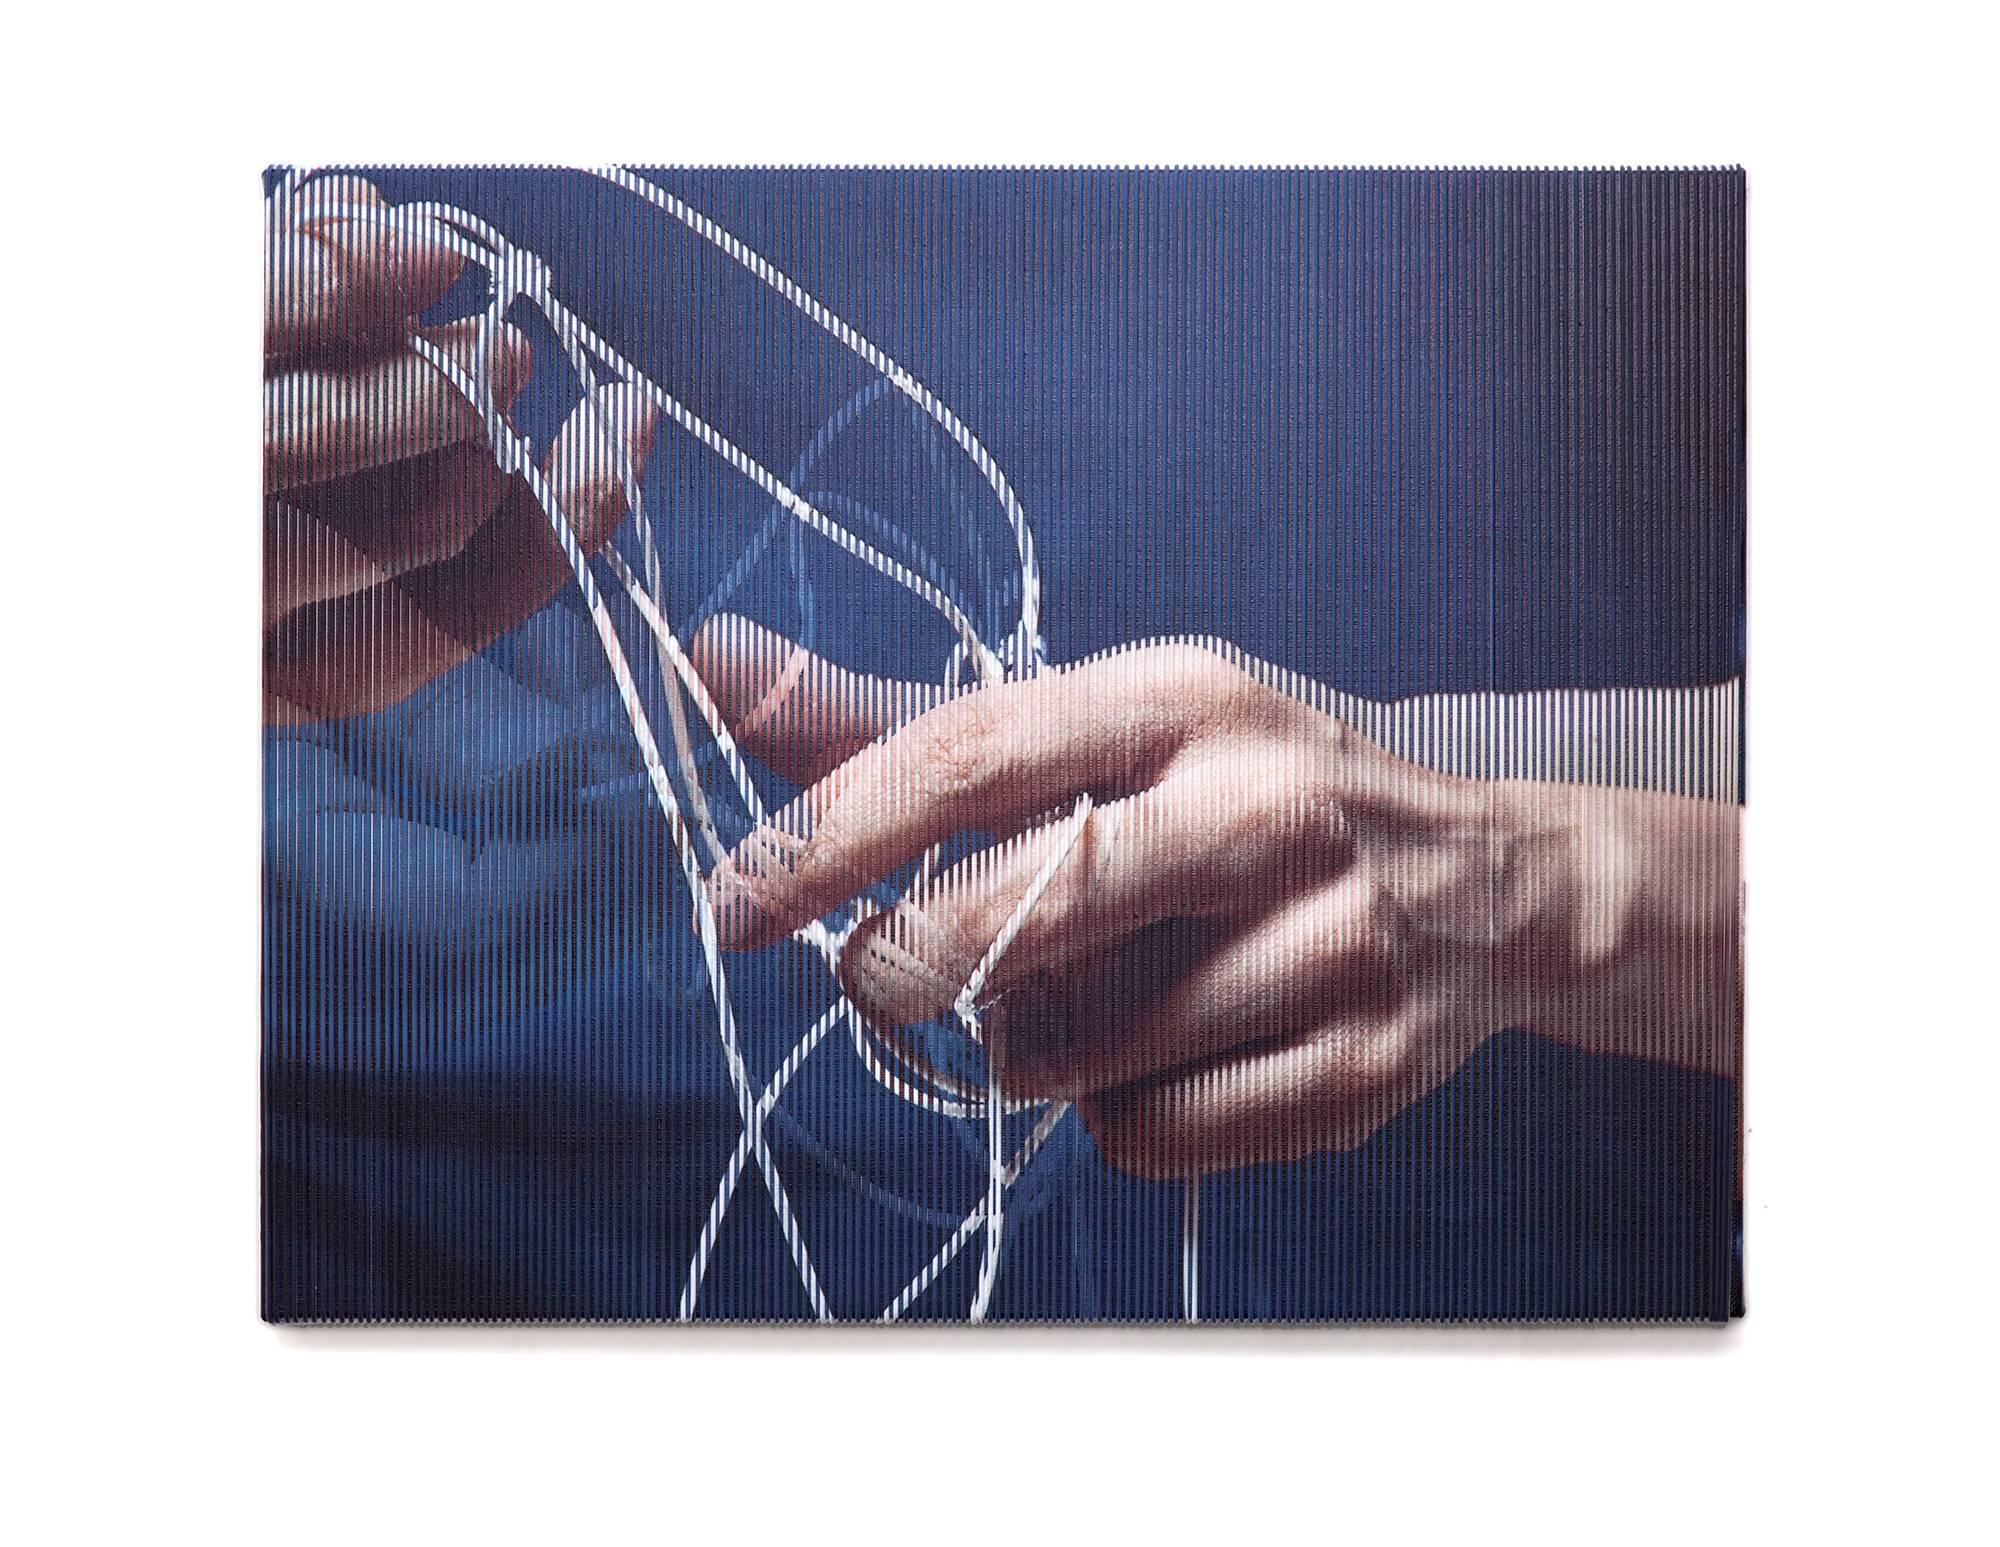 STRING_HANDS_C_0237 - Mixed Media Art by Hong Sungchul